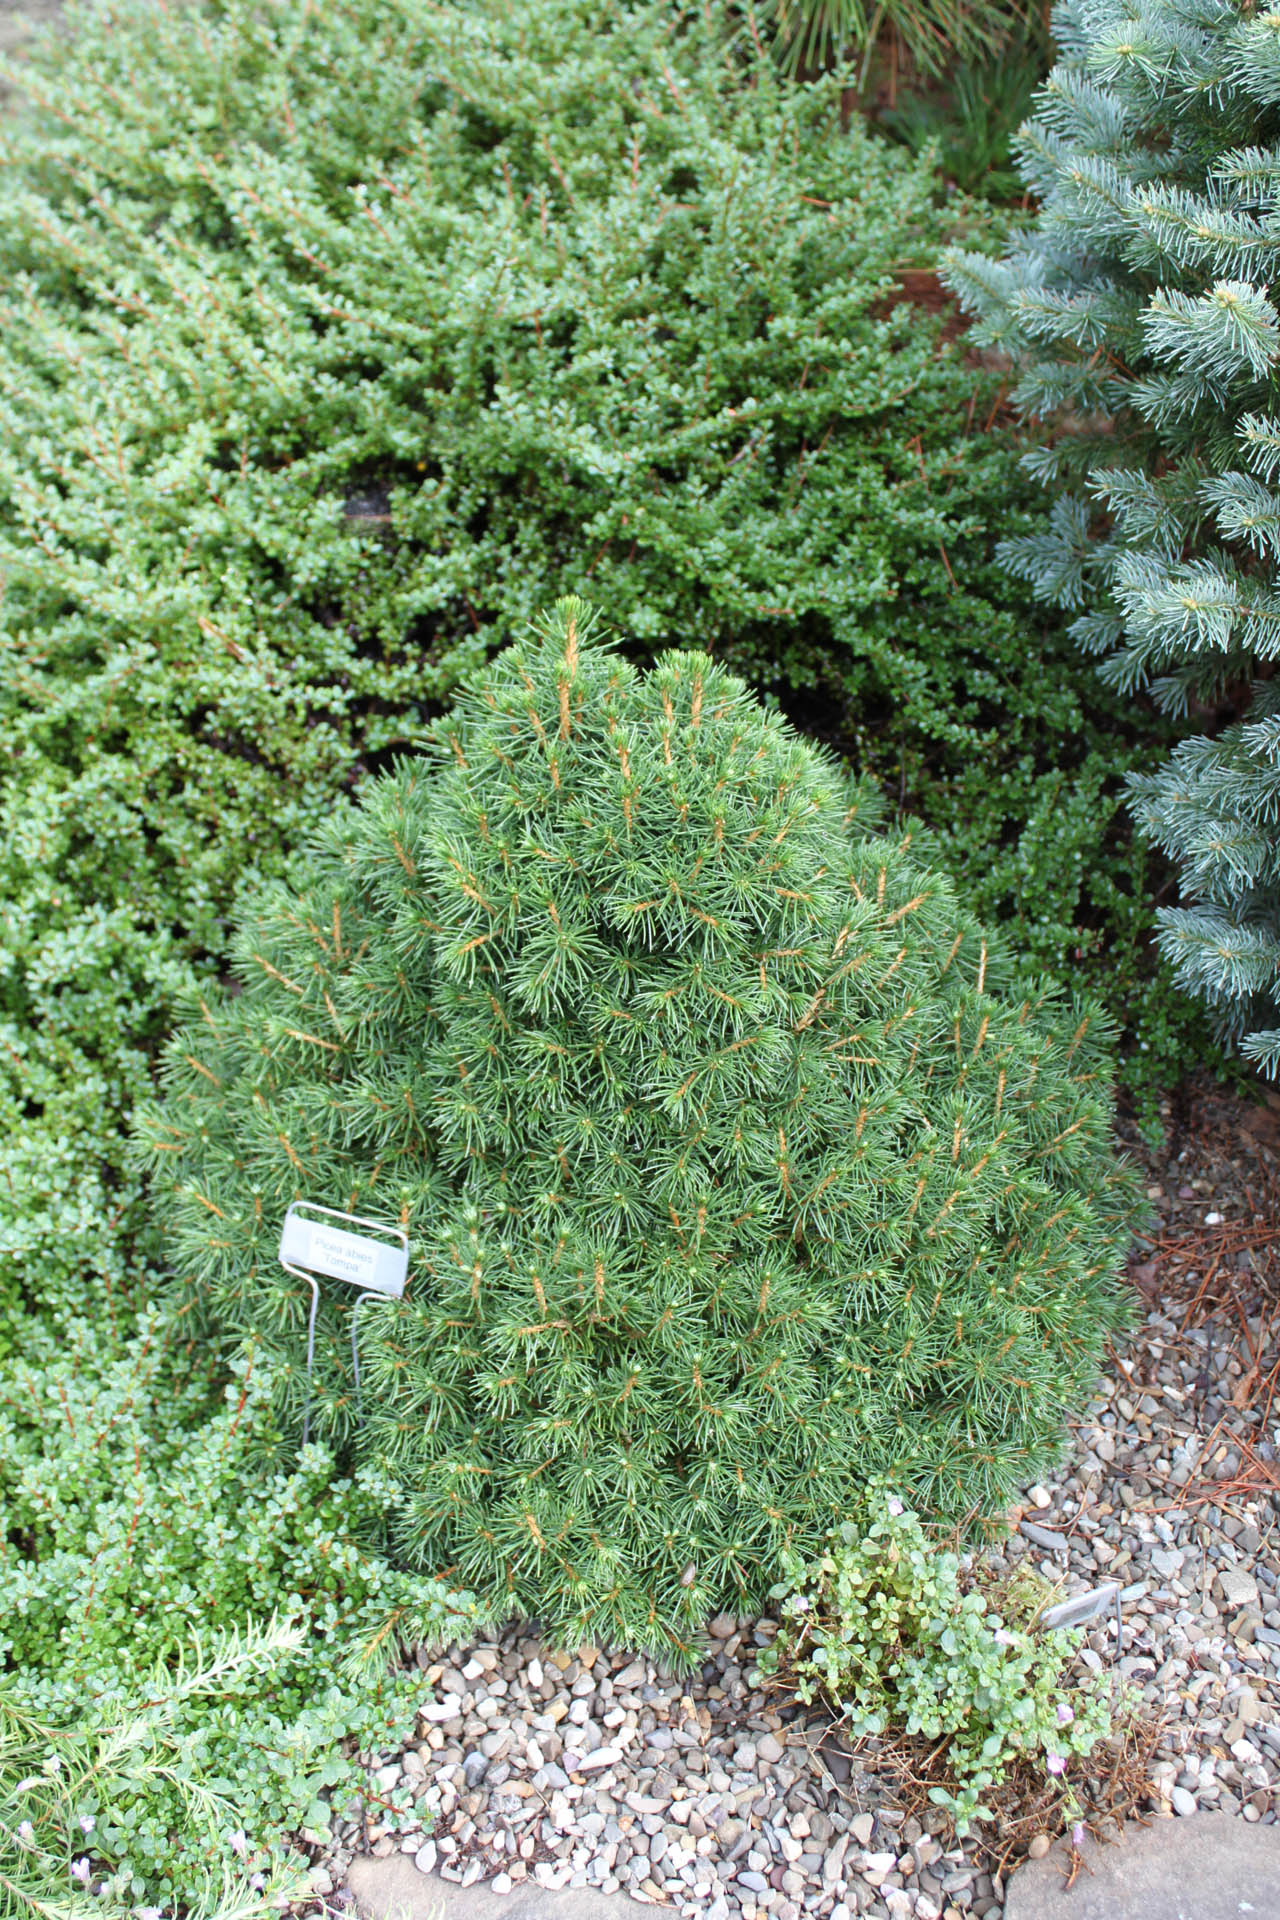 Picea abies ‘Tompa’